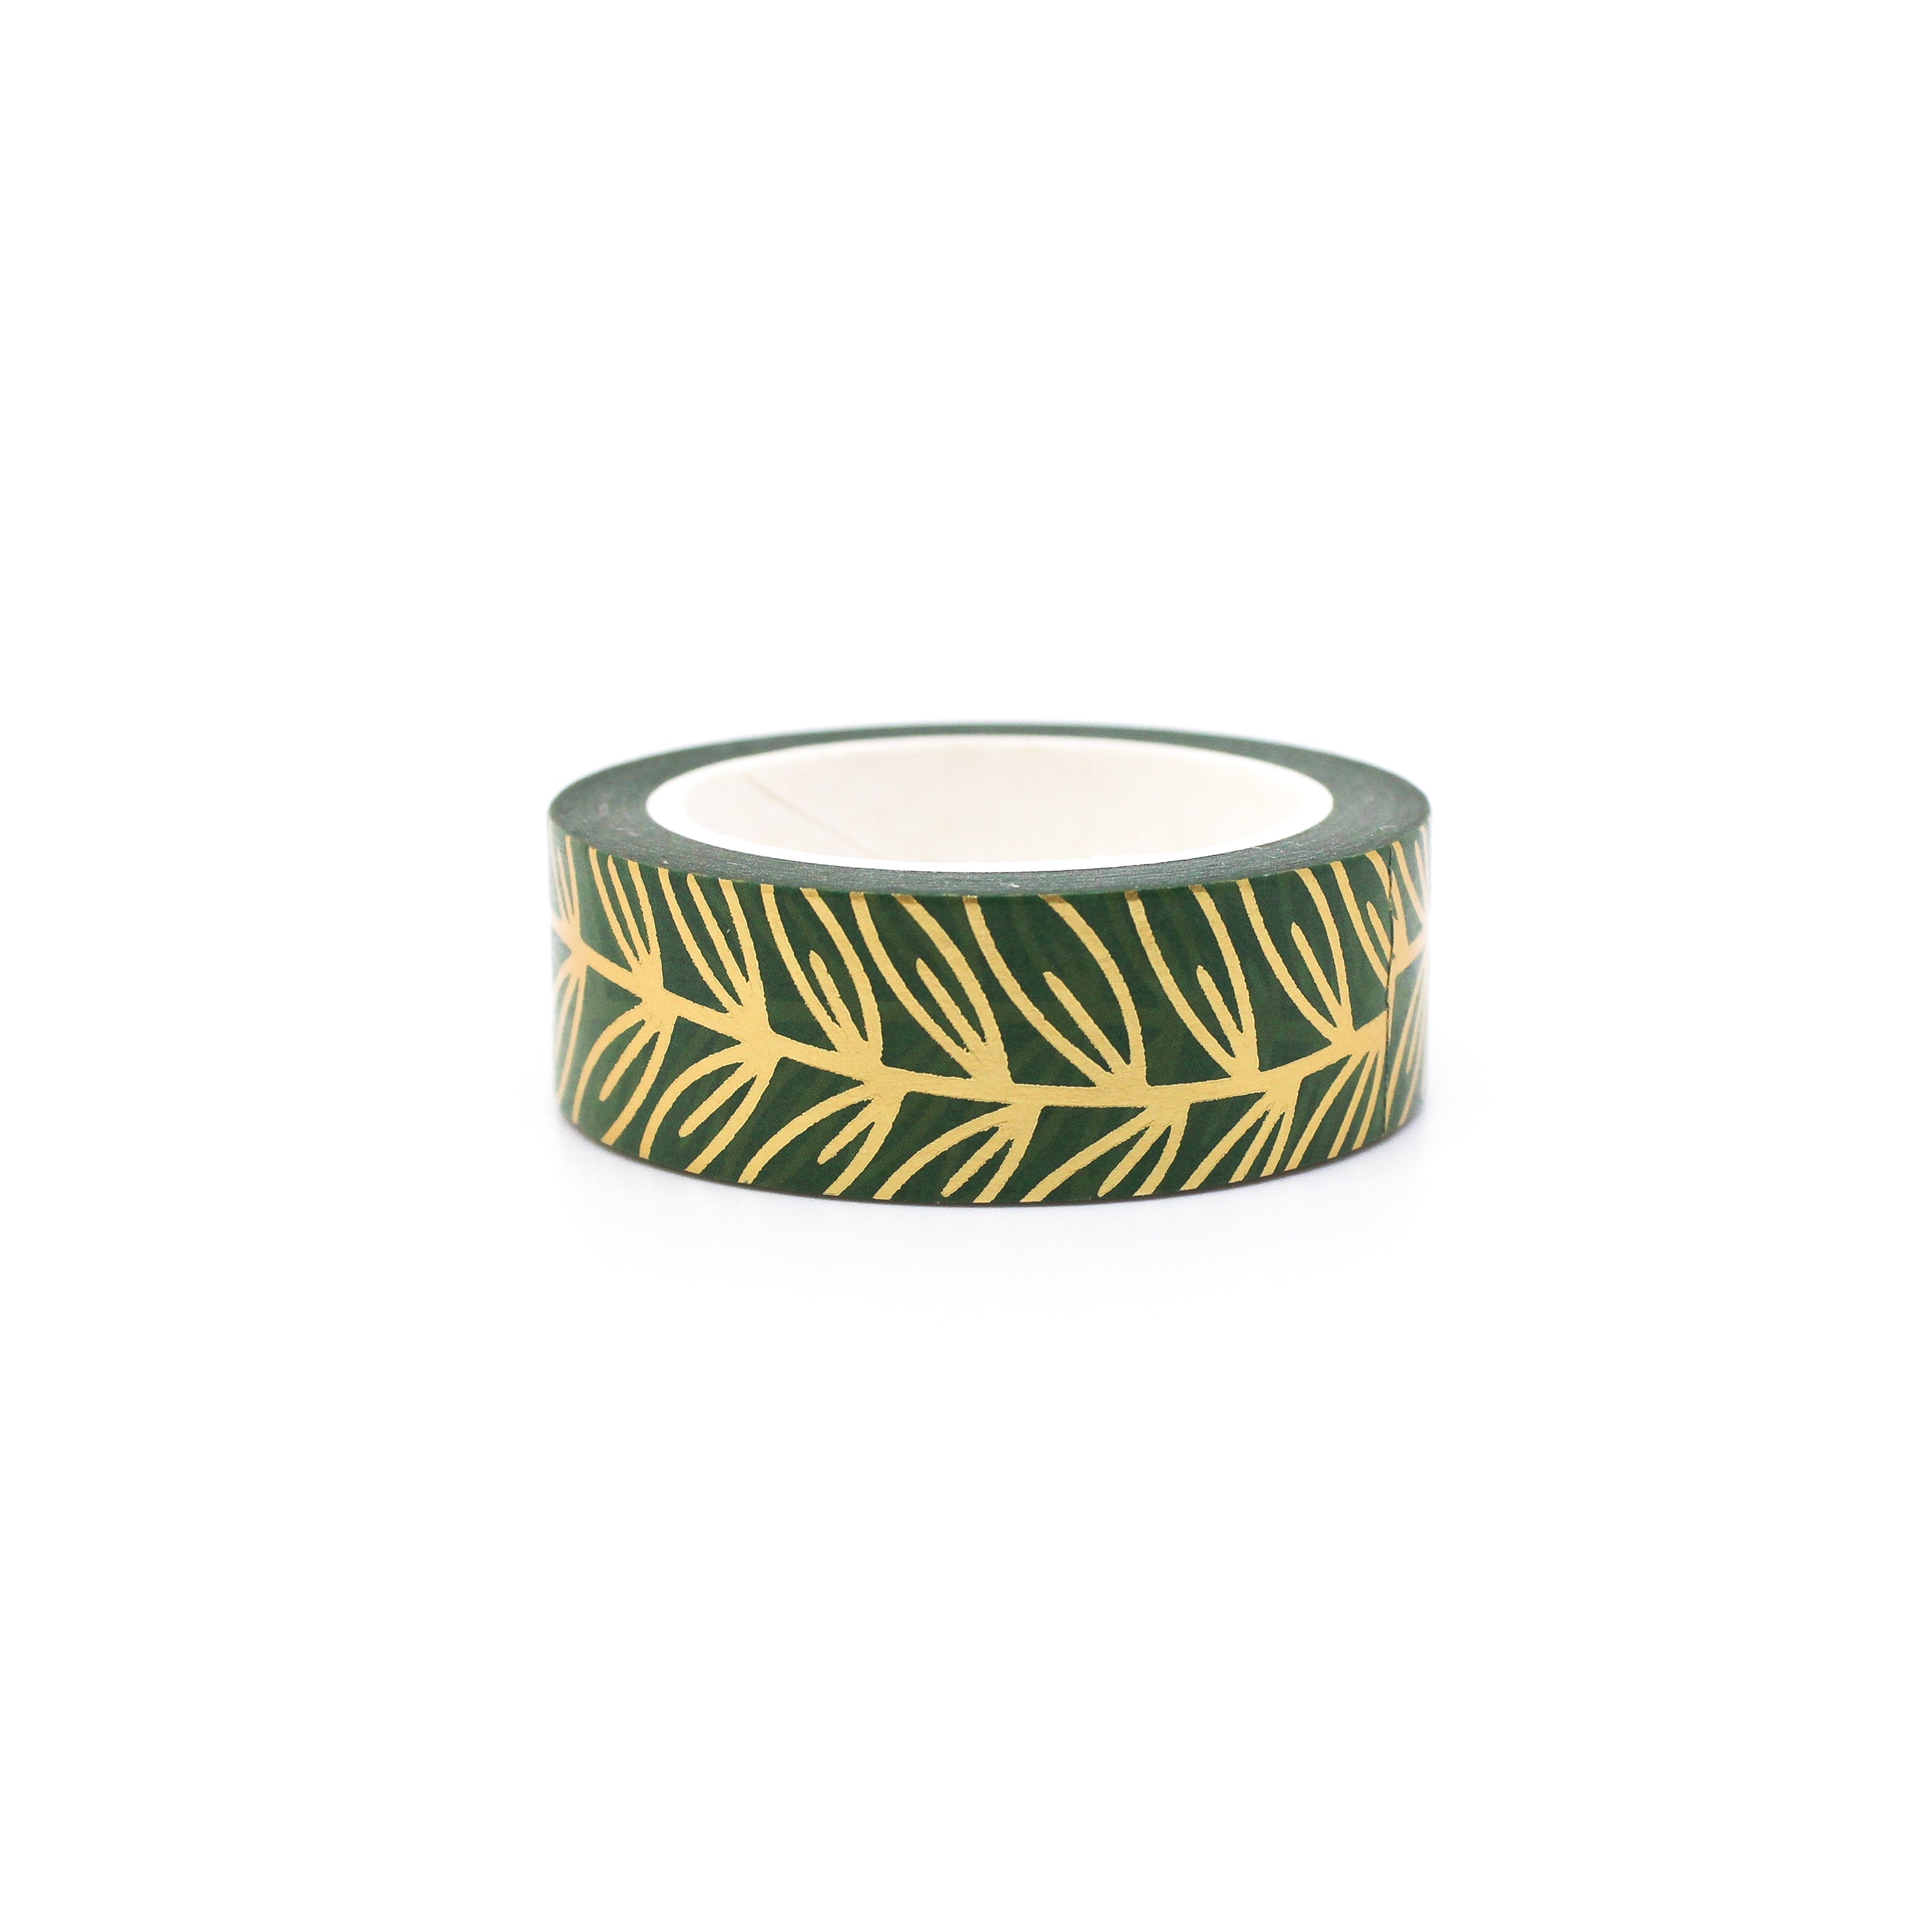 This is a cute vines pattern washi tape from BBB Supplies Craft Shop